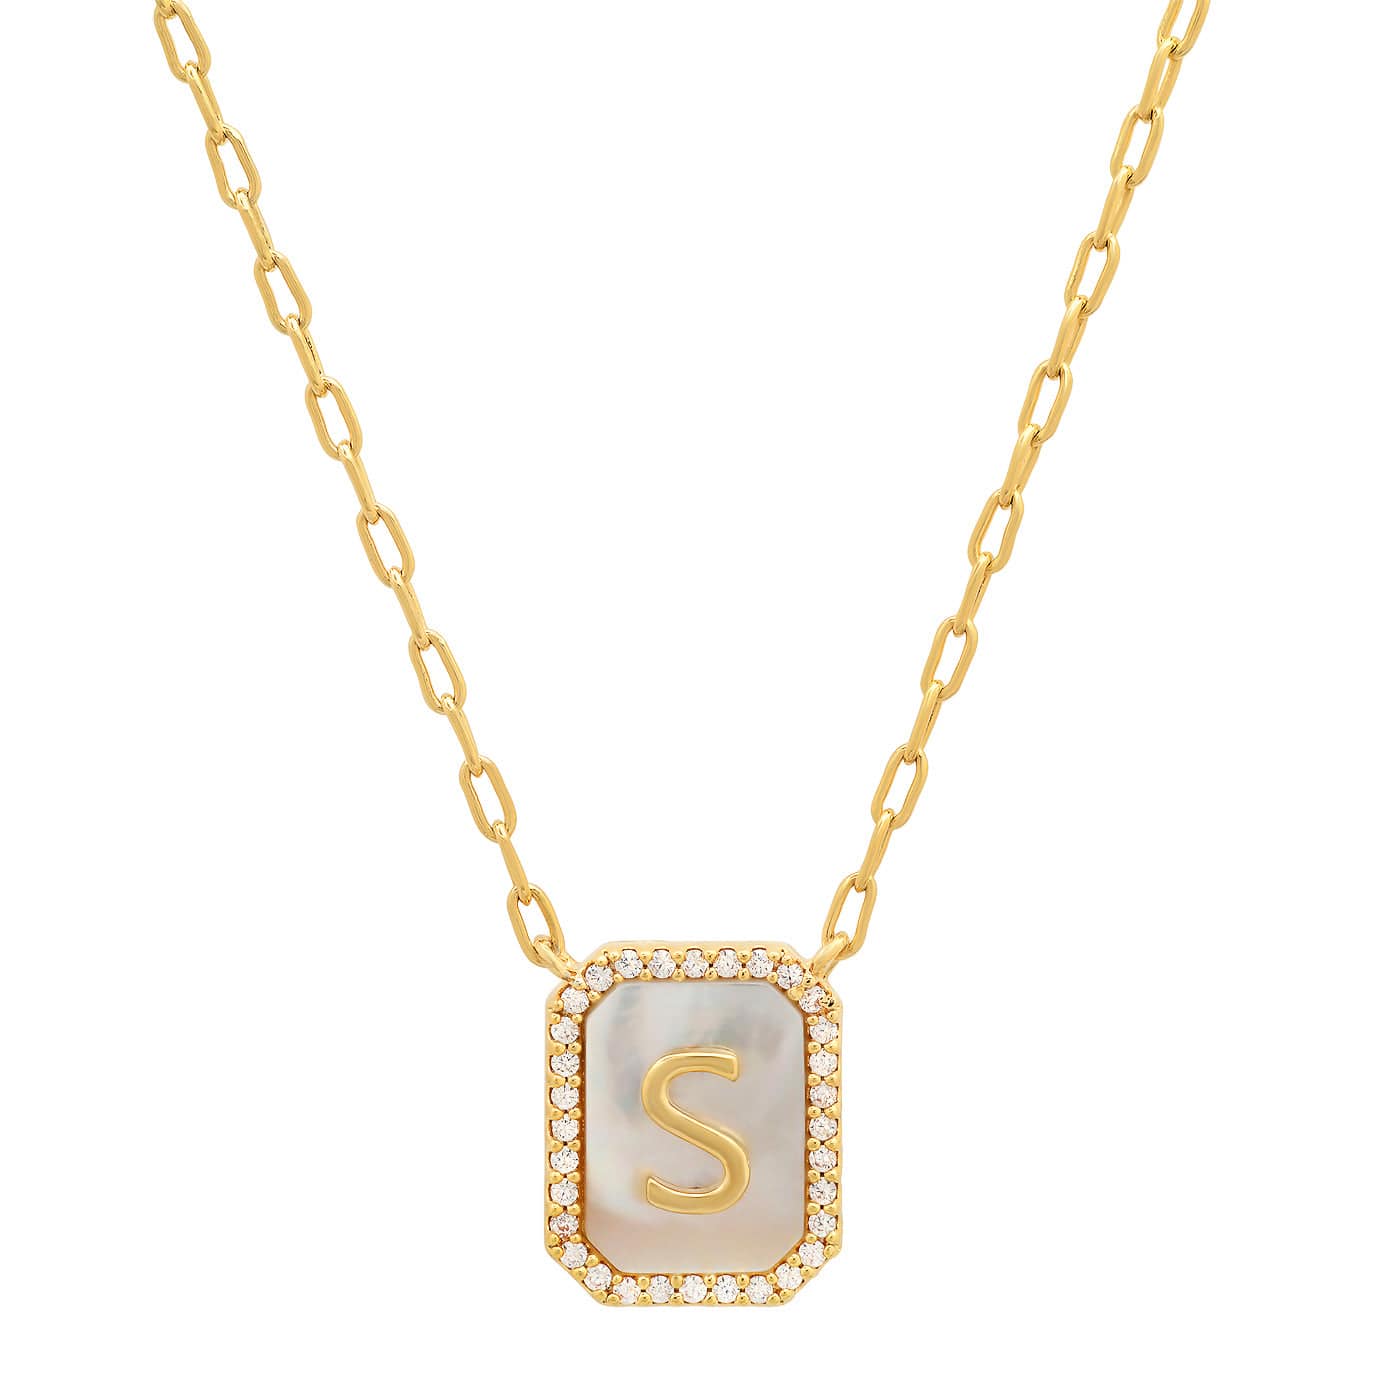 TAI JEWELRY Necklace S Mother Of Pearl Monogram Necklace